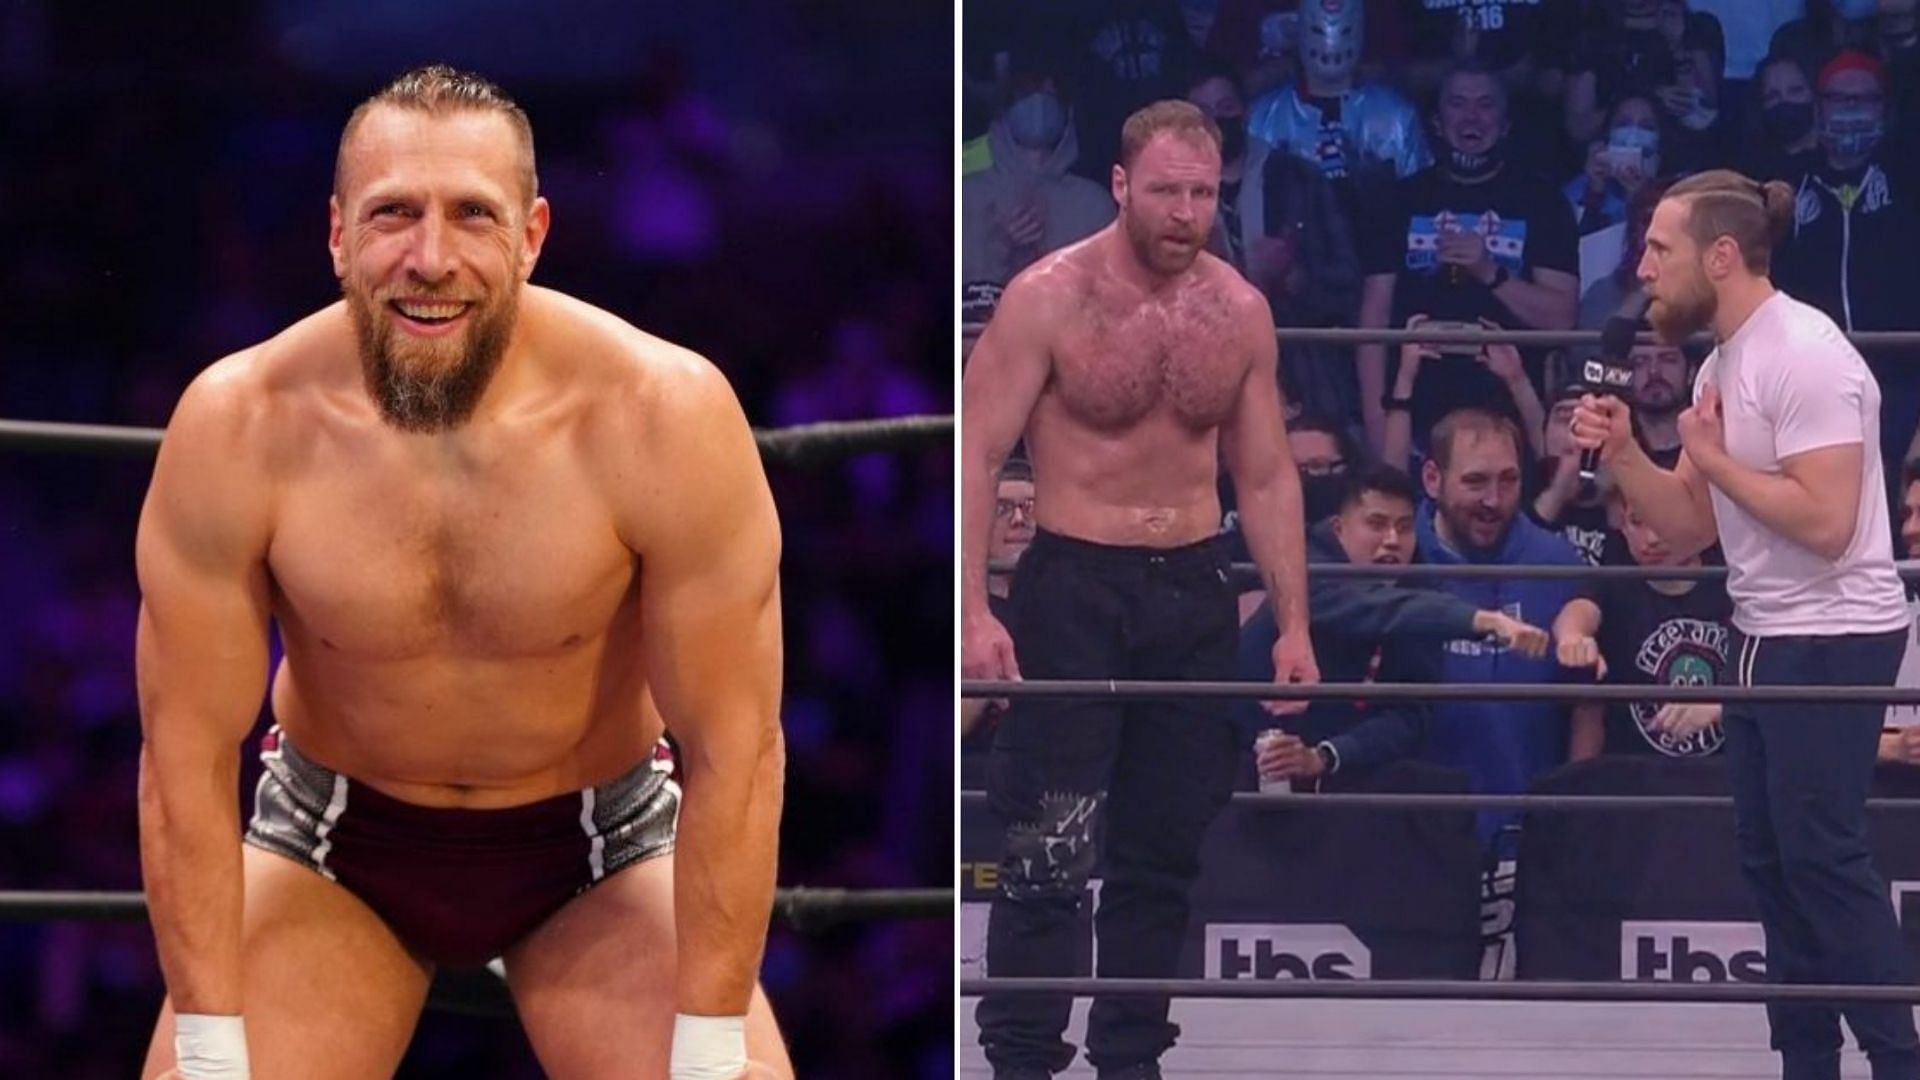 Bryan Danielson had a unique proposal for Jon Moxley